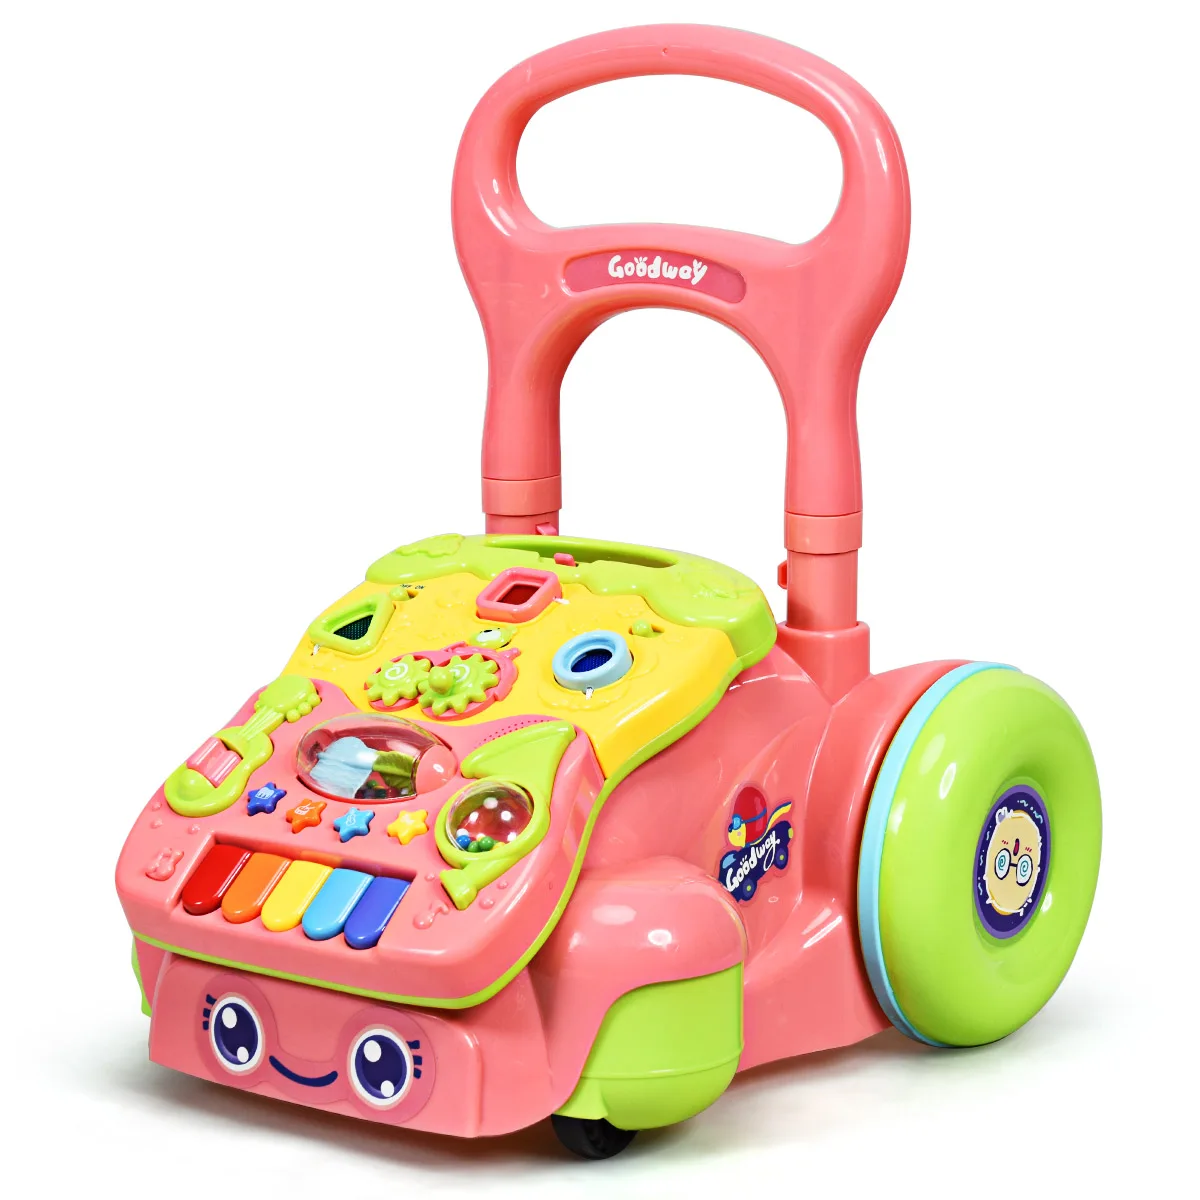 Baby Sit-to-Stand Learning Walker Toddler Kids Musical Toy w/ LED Light Pink